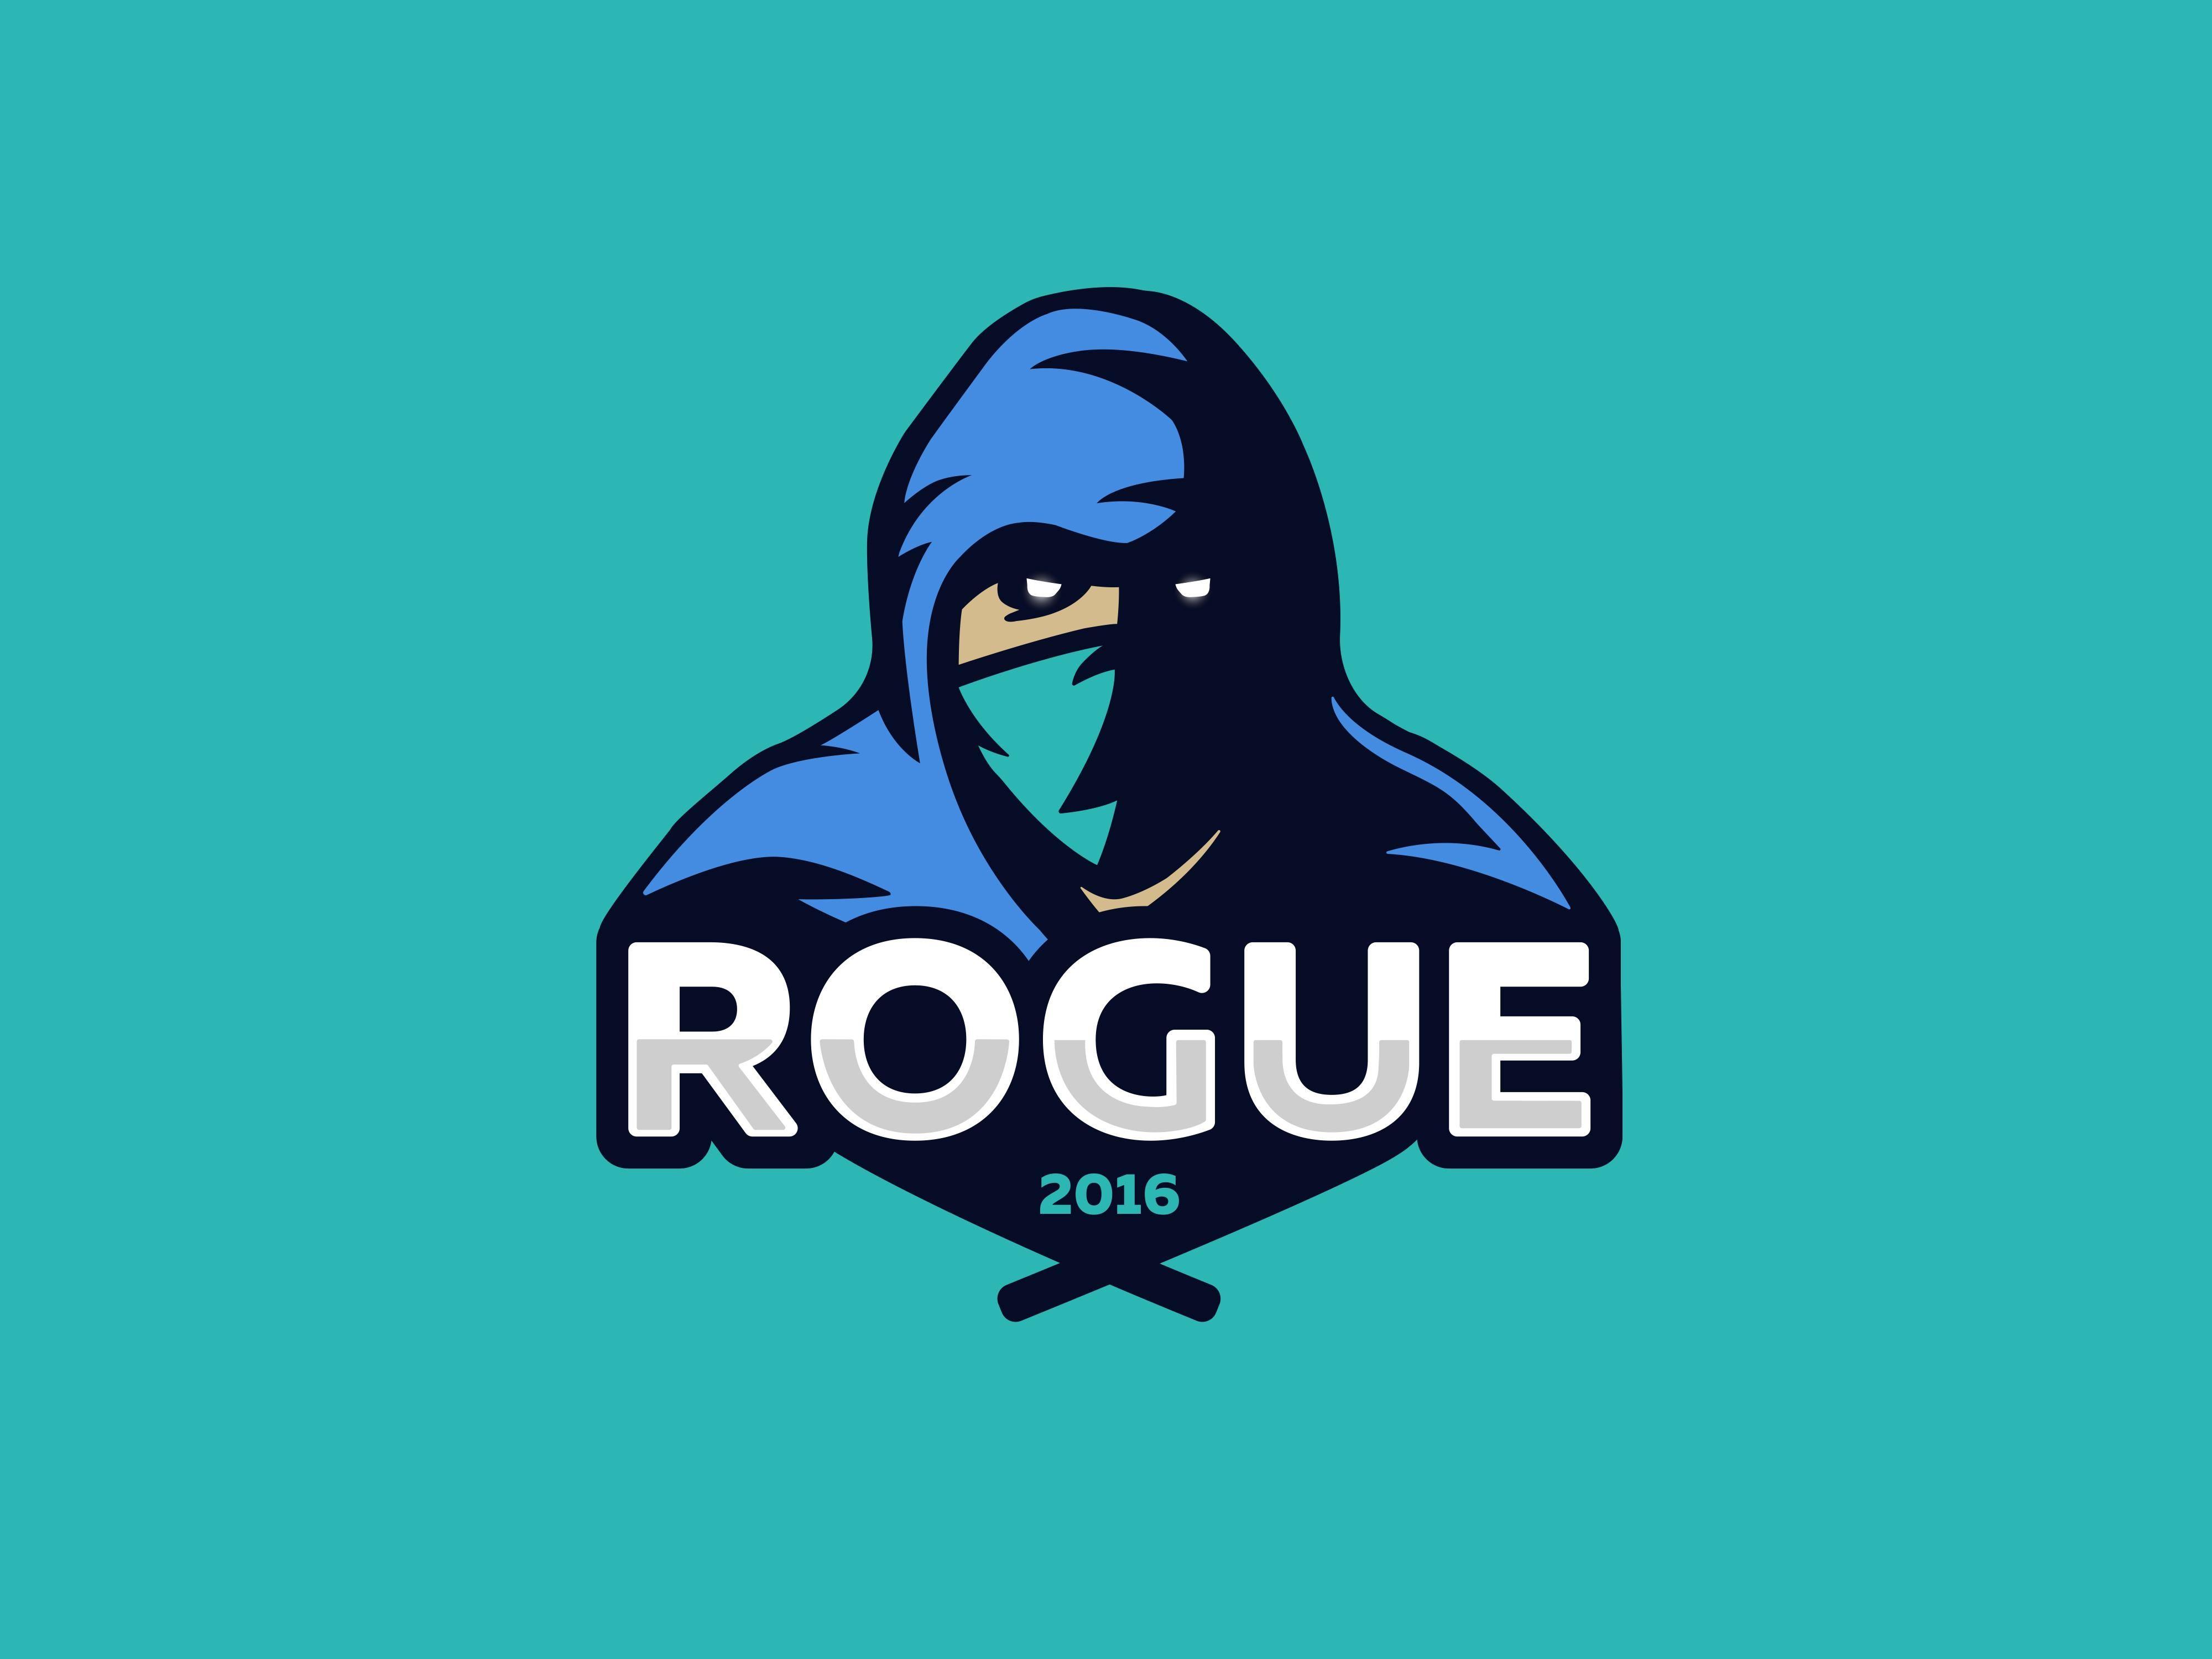 Rogues Logo - This is just my view of 